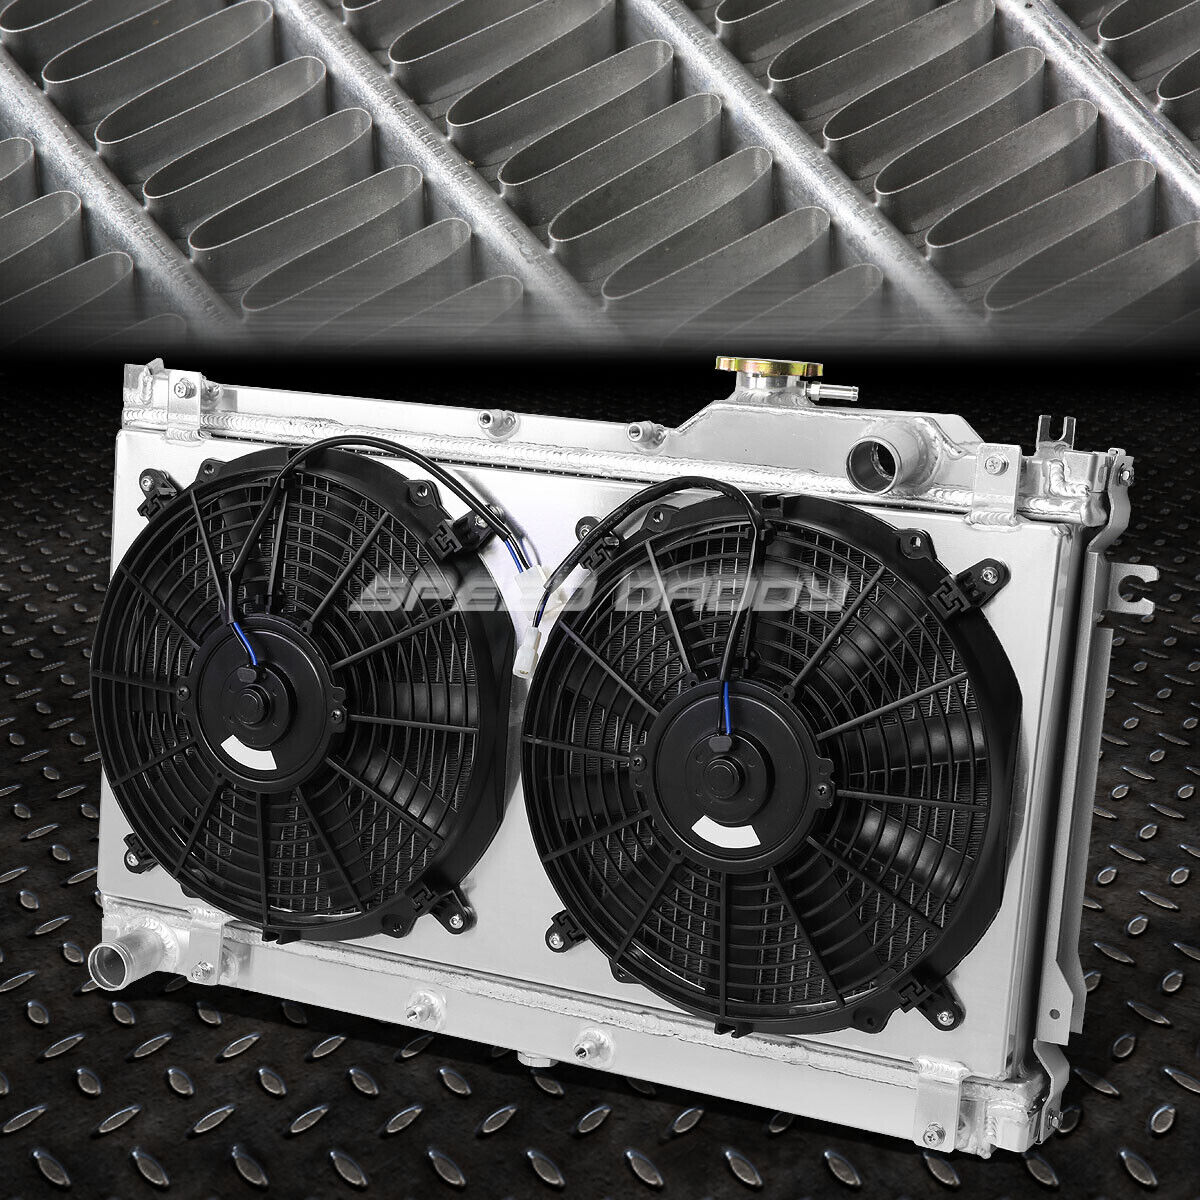 2-Row Performance Radiator Replacement+Cooling Fan for 90-97 Mazda Miata Mx-5 NA